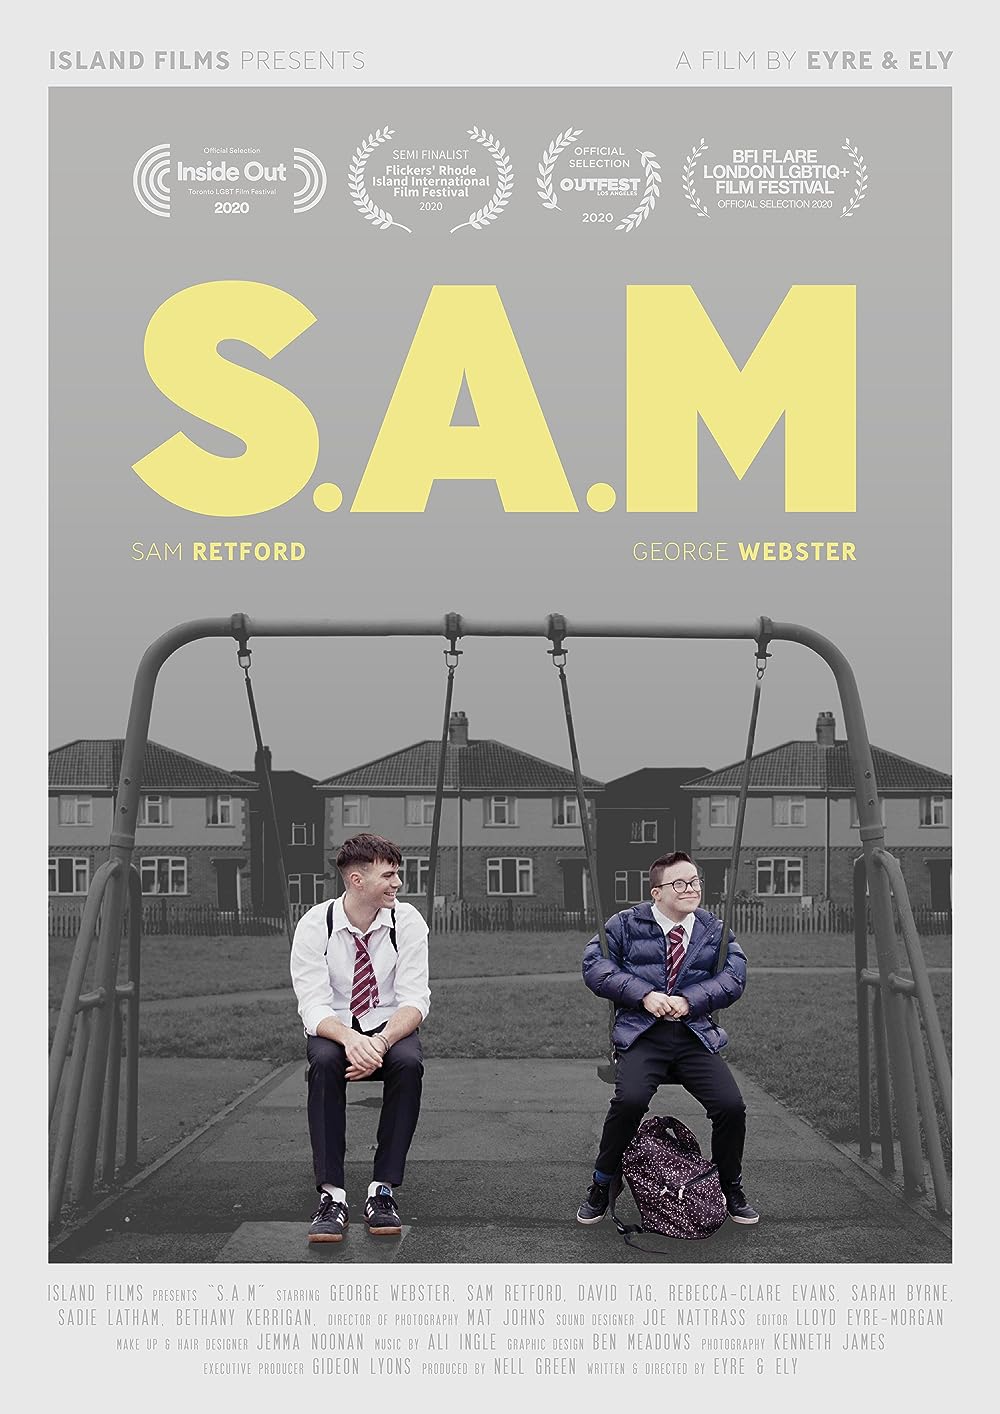 film poster for the short film S.A.M. depicting two boys sitting on swings.